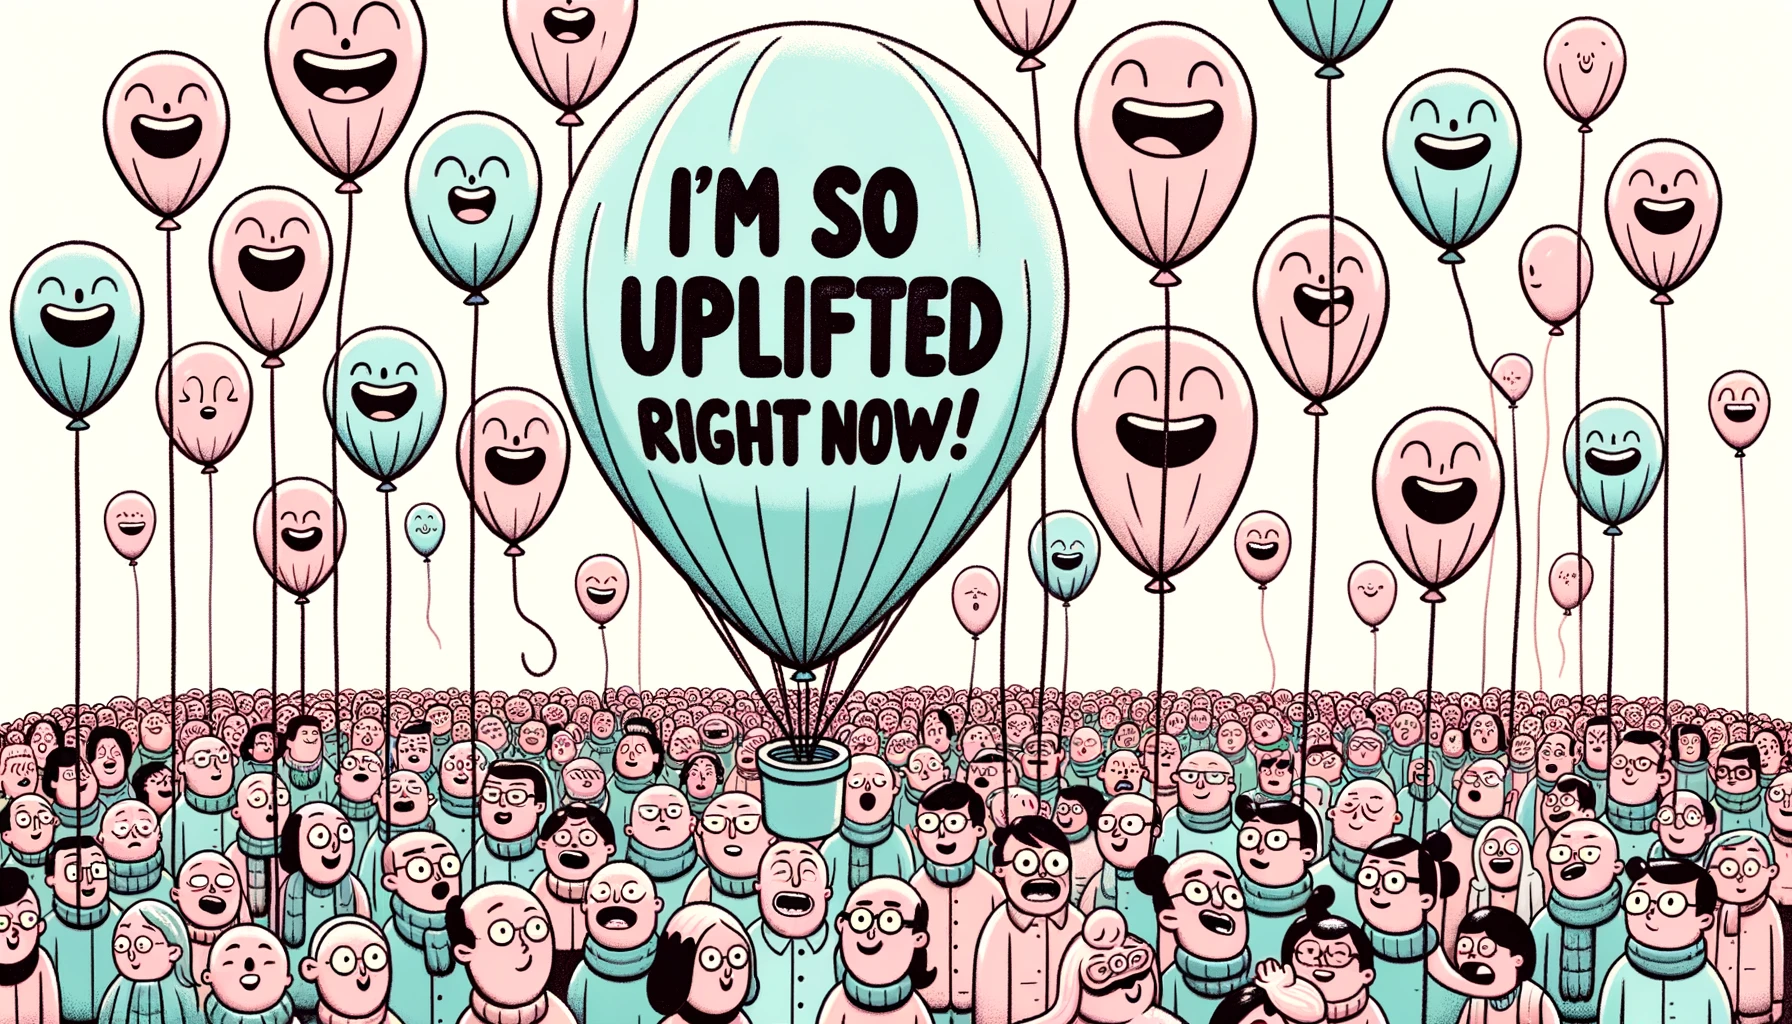 I'm so uplifted right now - Balloon Pun